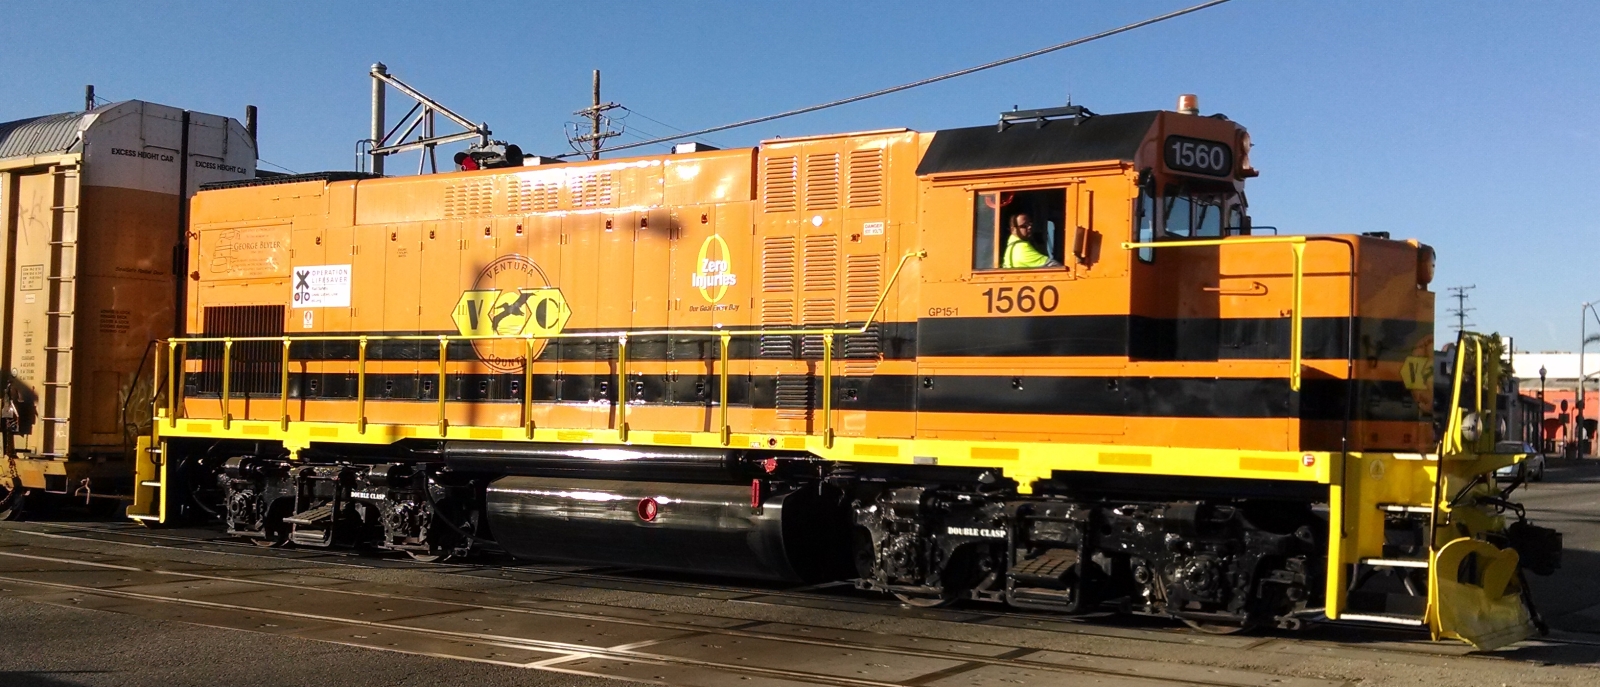 GP15-1 of the Ventura County Railroad, a subsidiary of Genesee and Wyoming